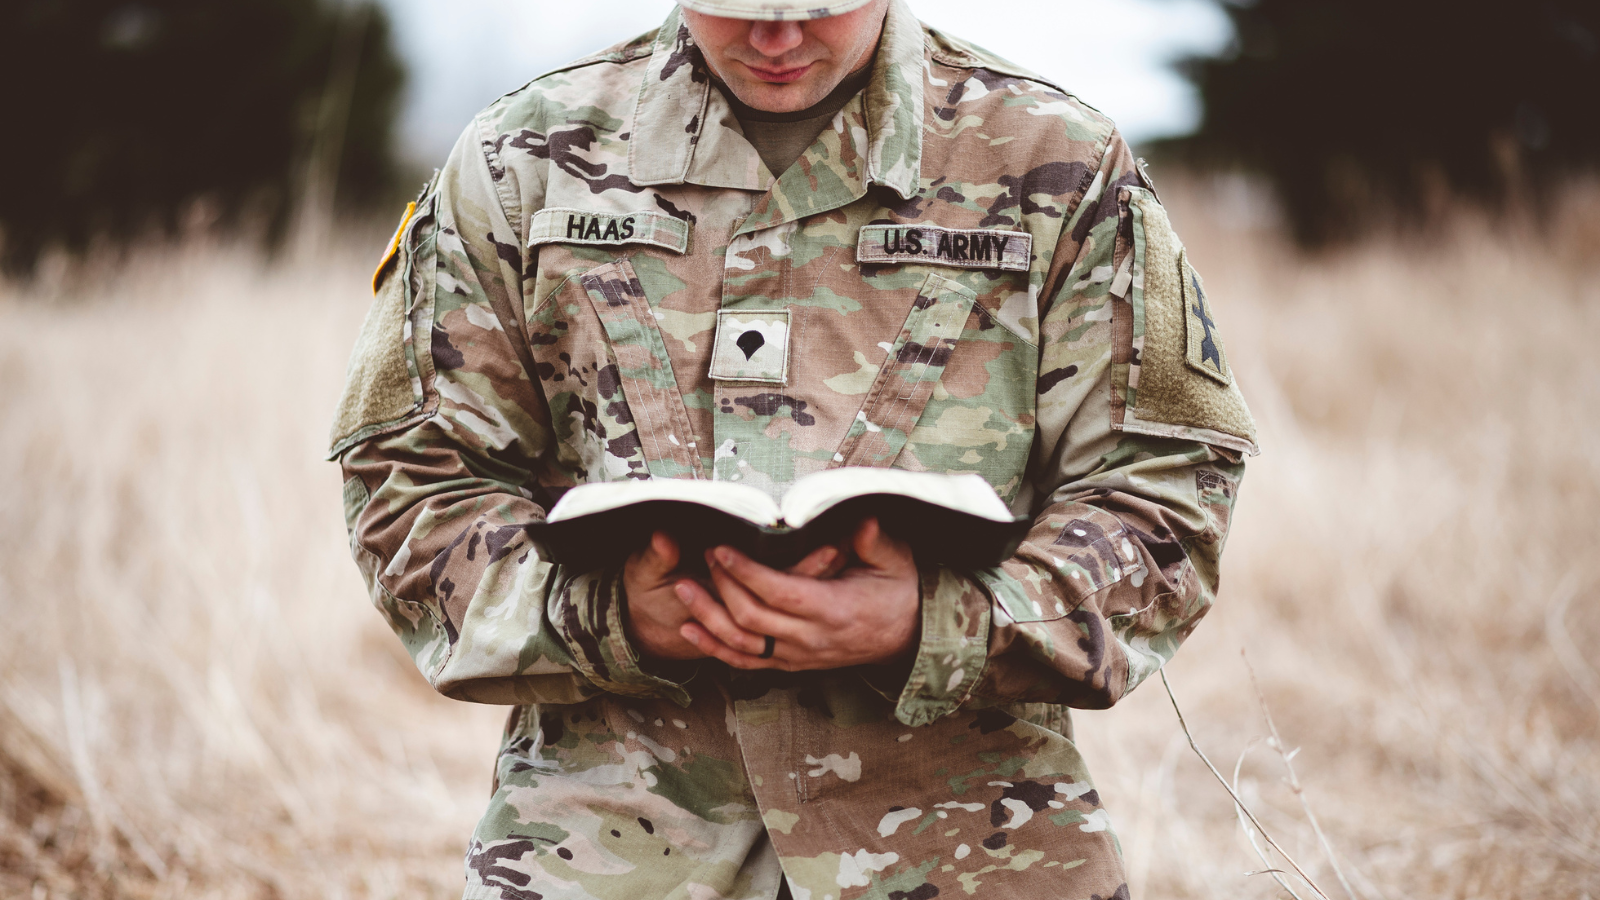 A man wearing a military uniform and reading a bible.